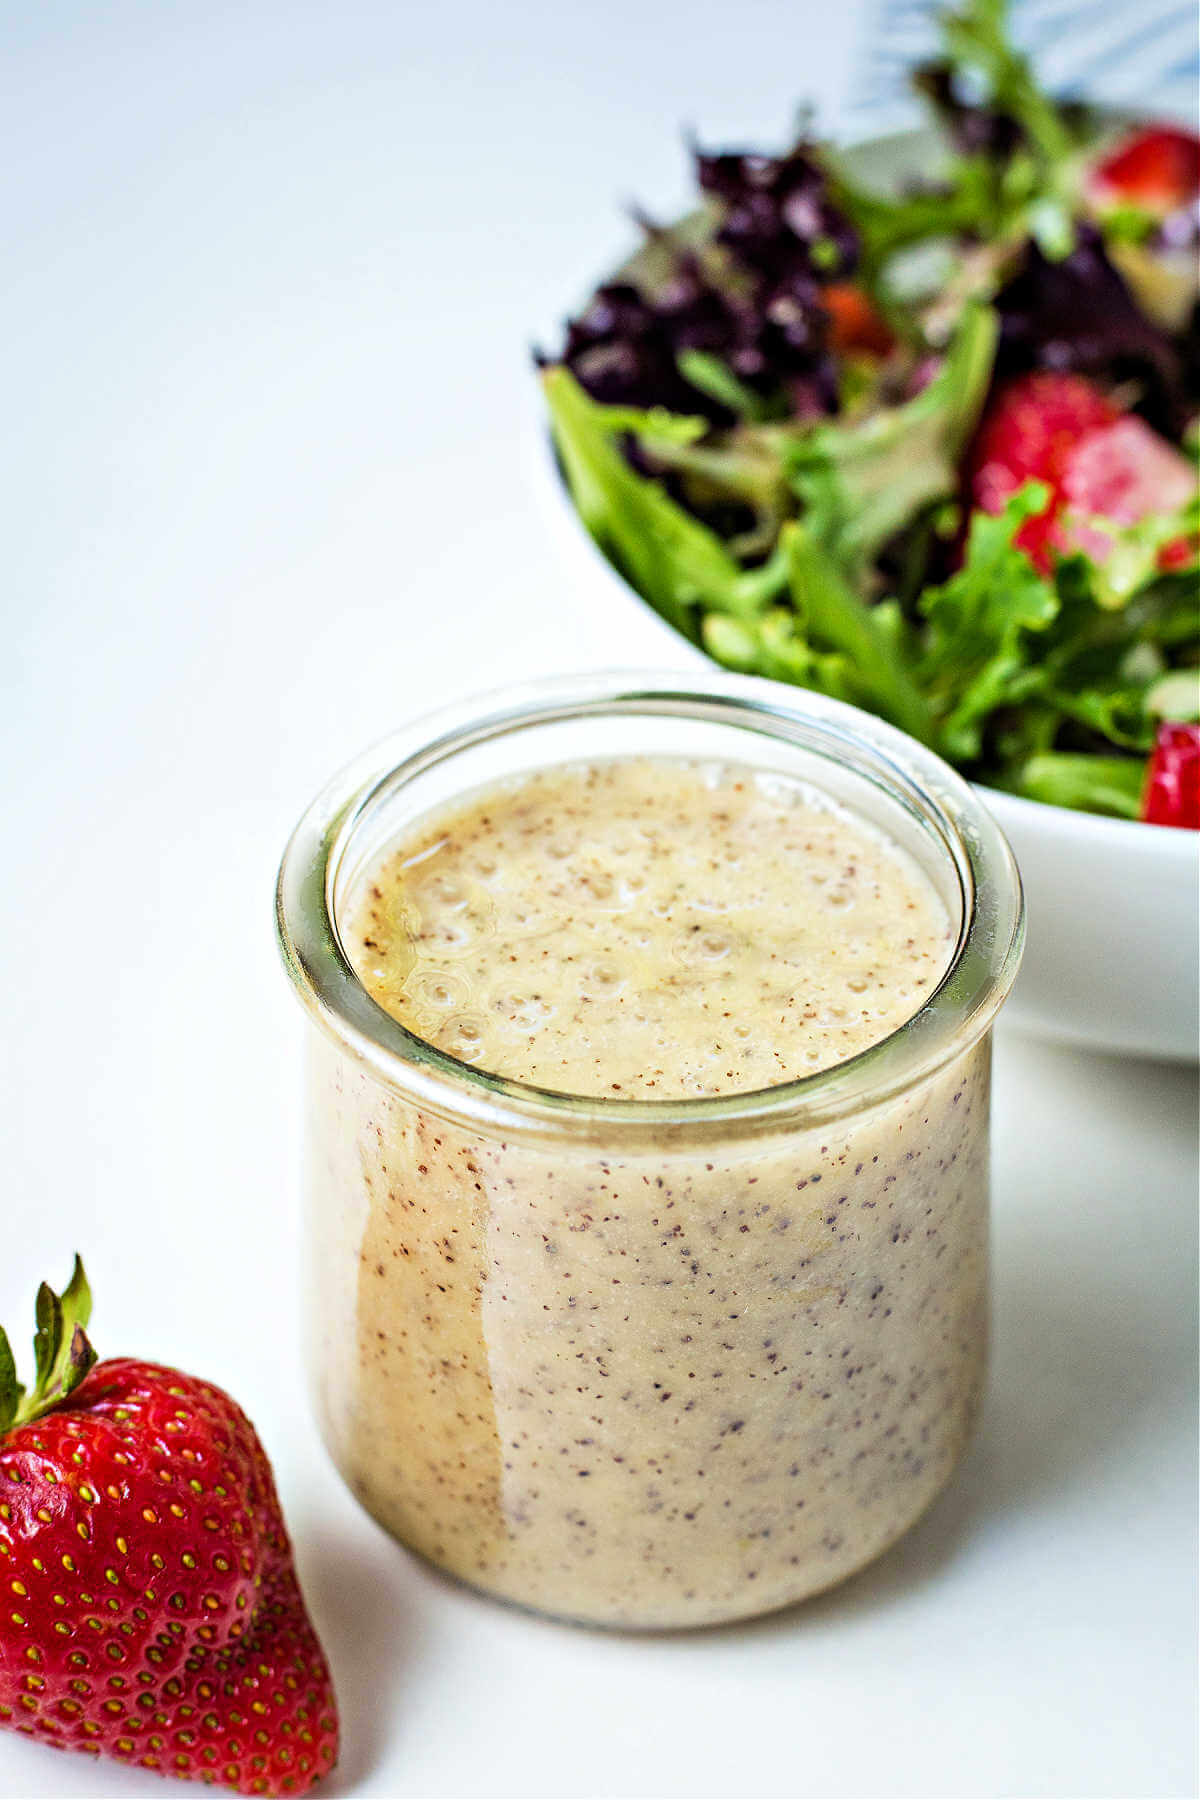 poppy seed dressing in a small glass jar sitting on a table in front of a bowl of salad.